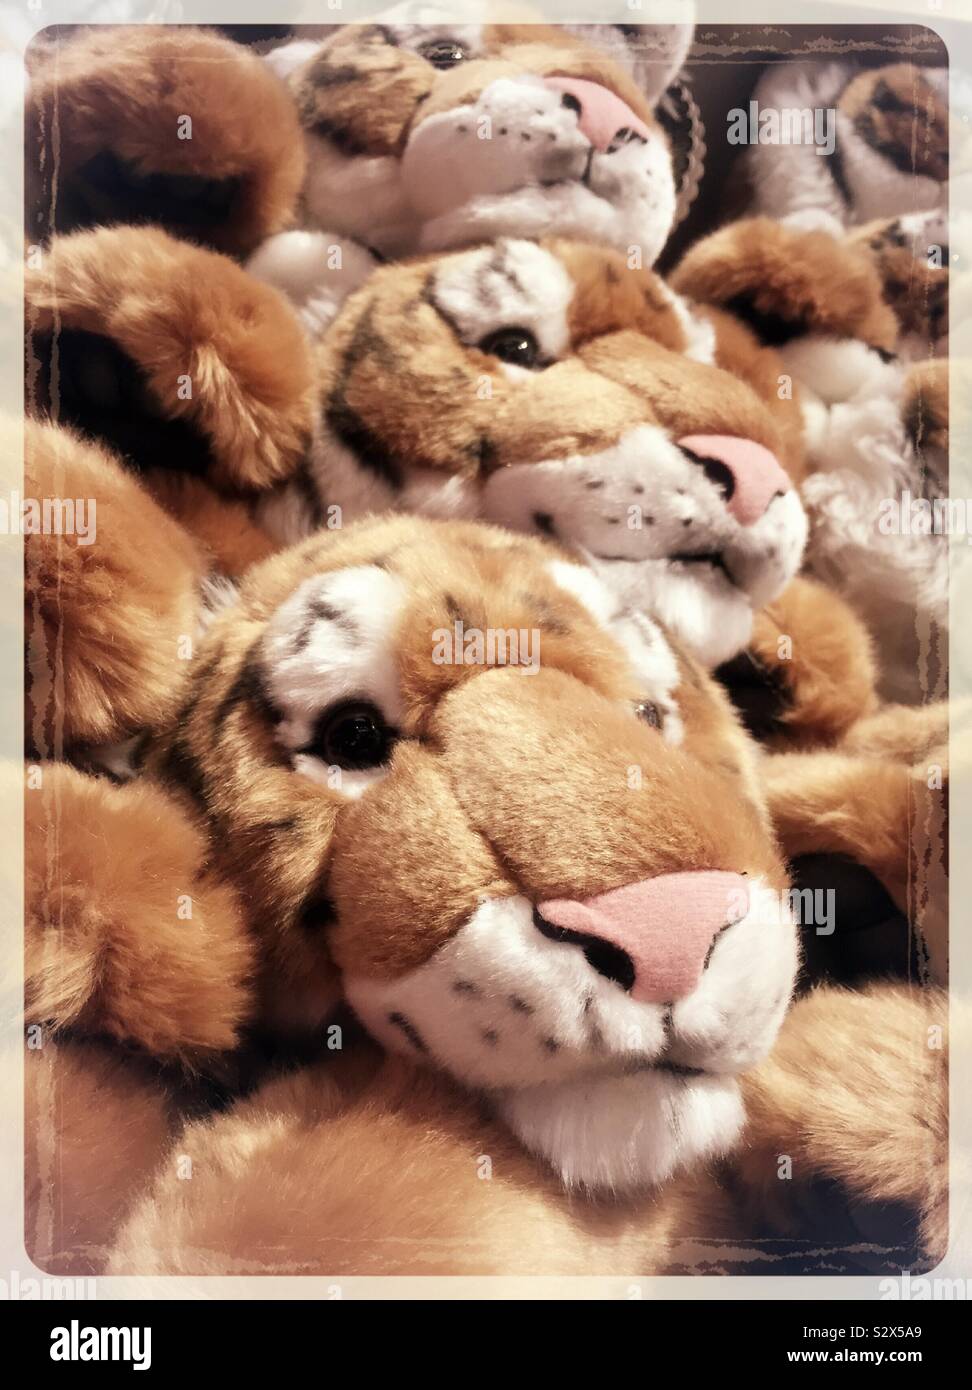 stuffed tigers for sale